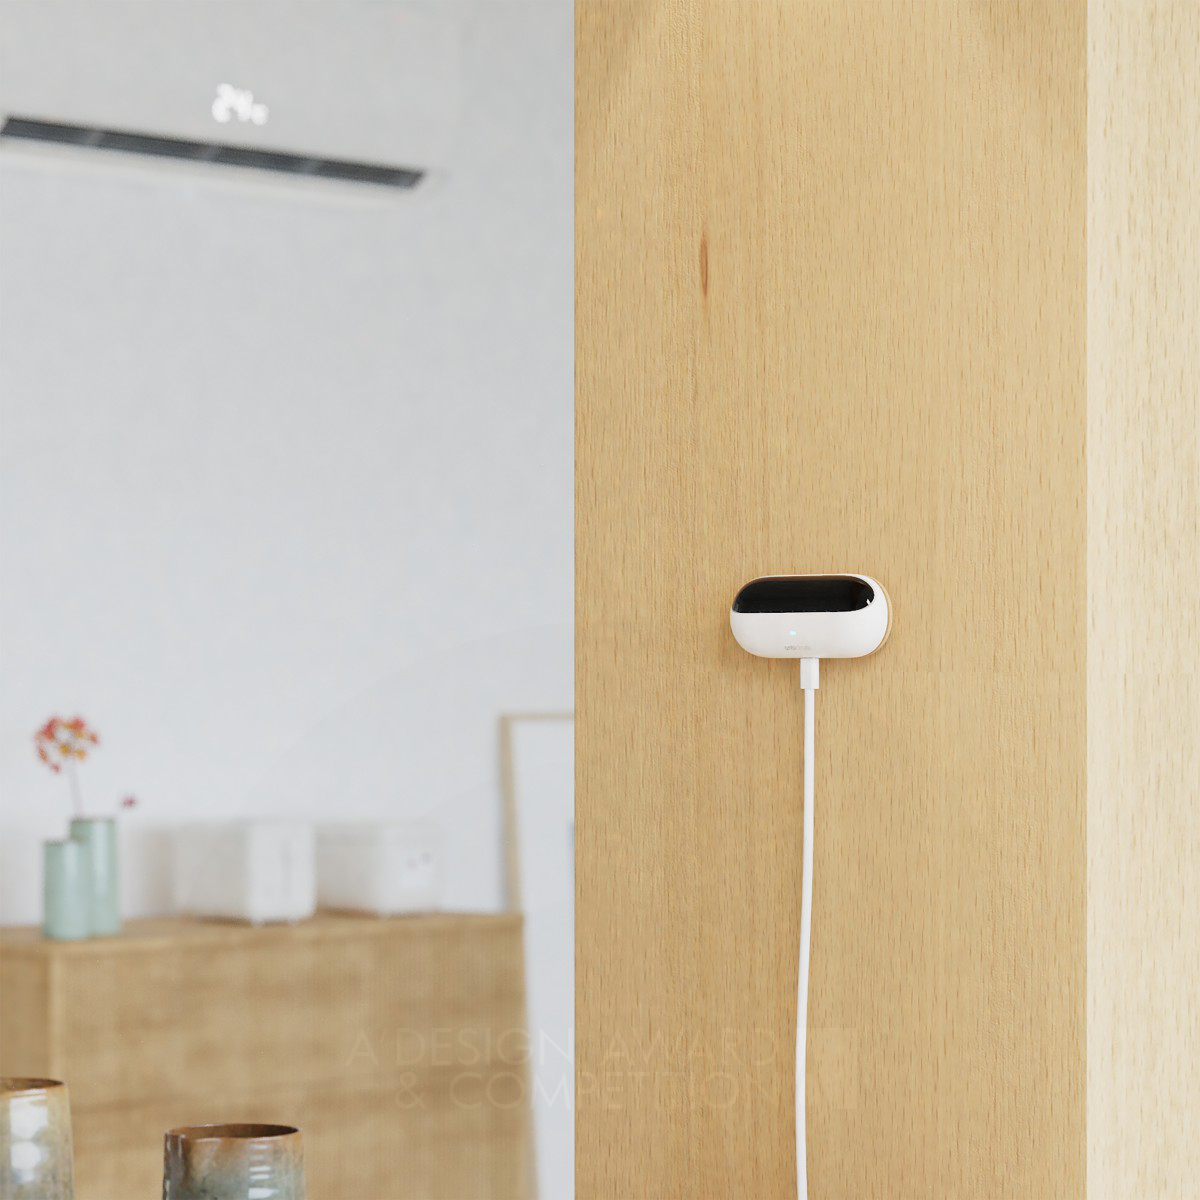 Ambi Climate Mini Smart Air-conditioned Controller by Jervis Chua